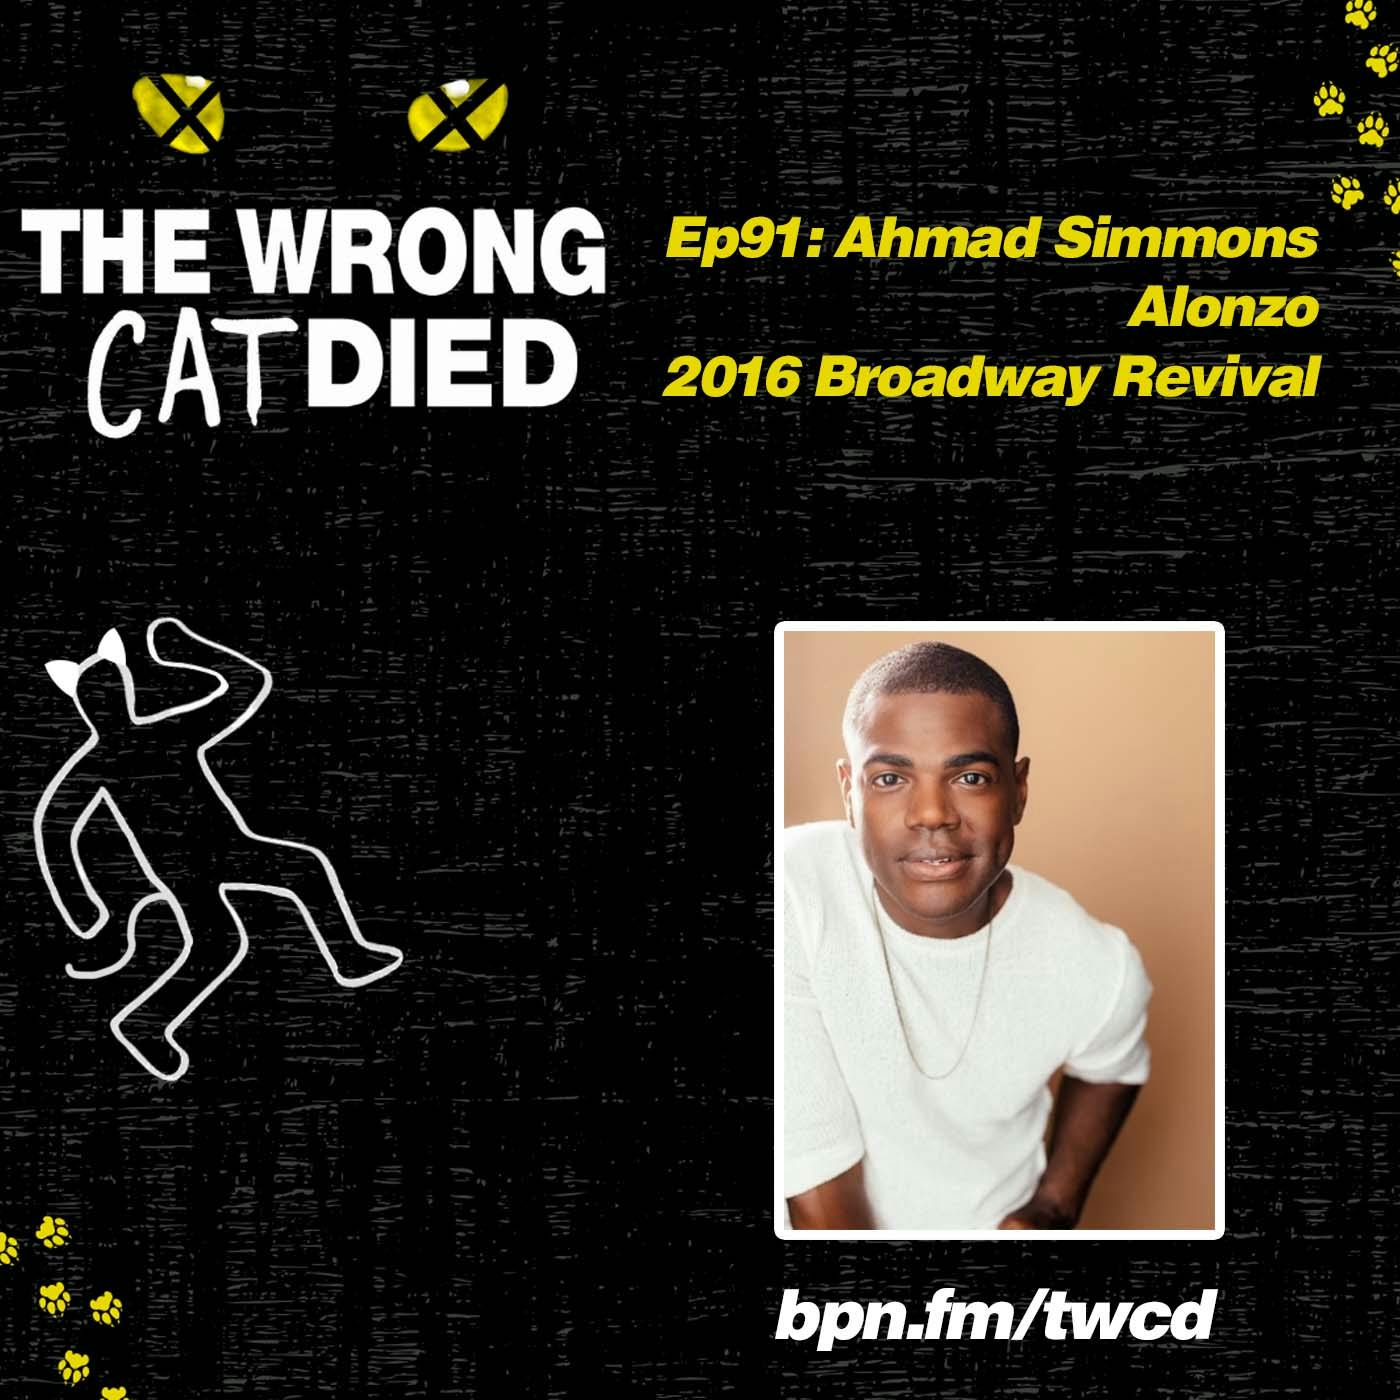 Ep91 - Ahmad Simmons, Alonzo on 2016 Broadway Revival